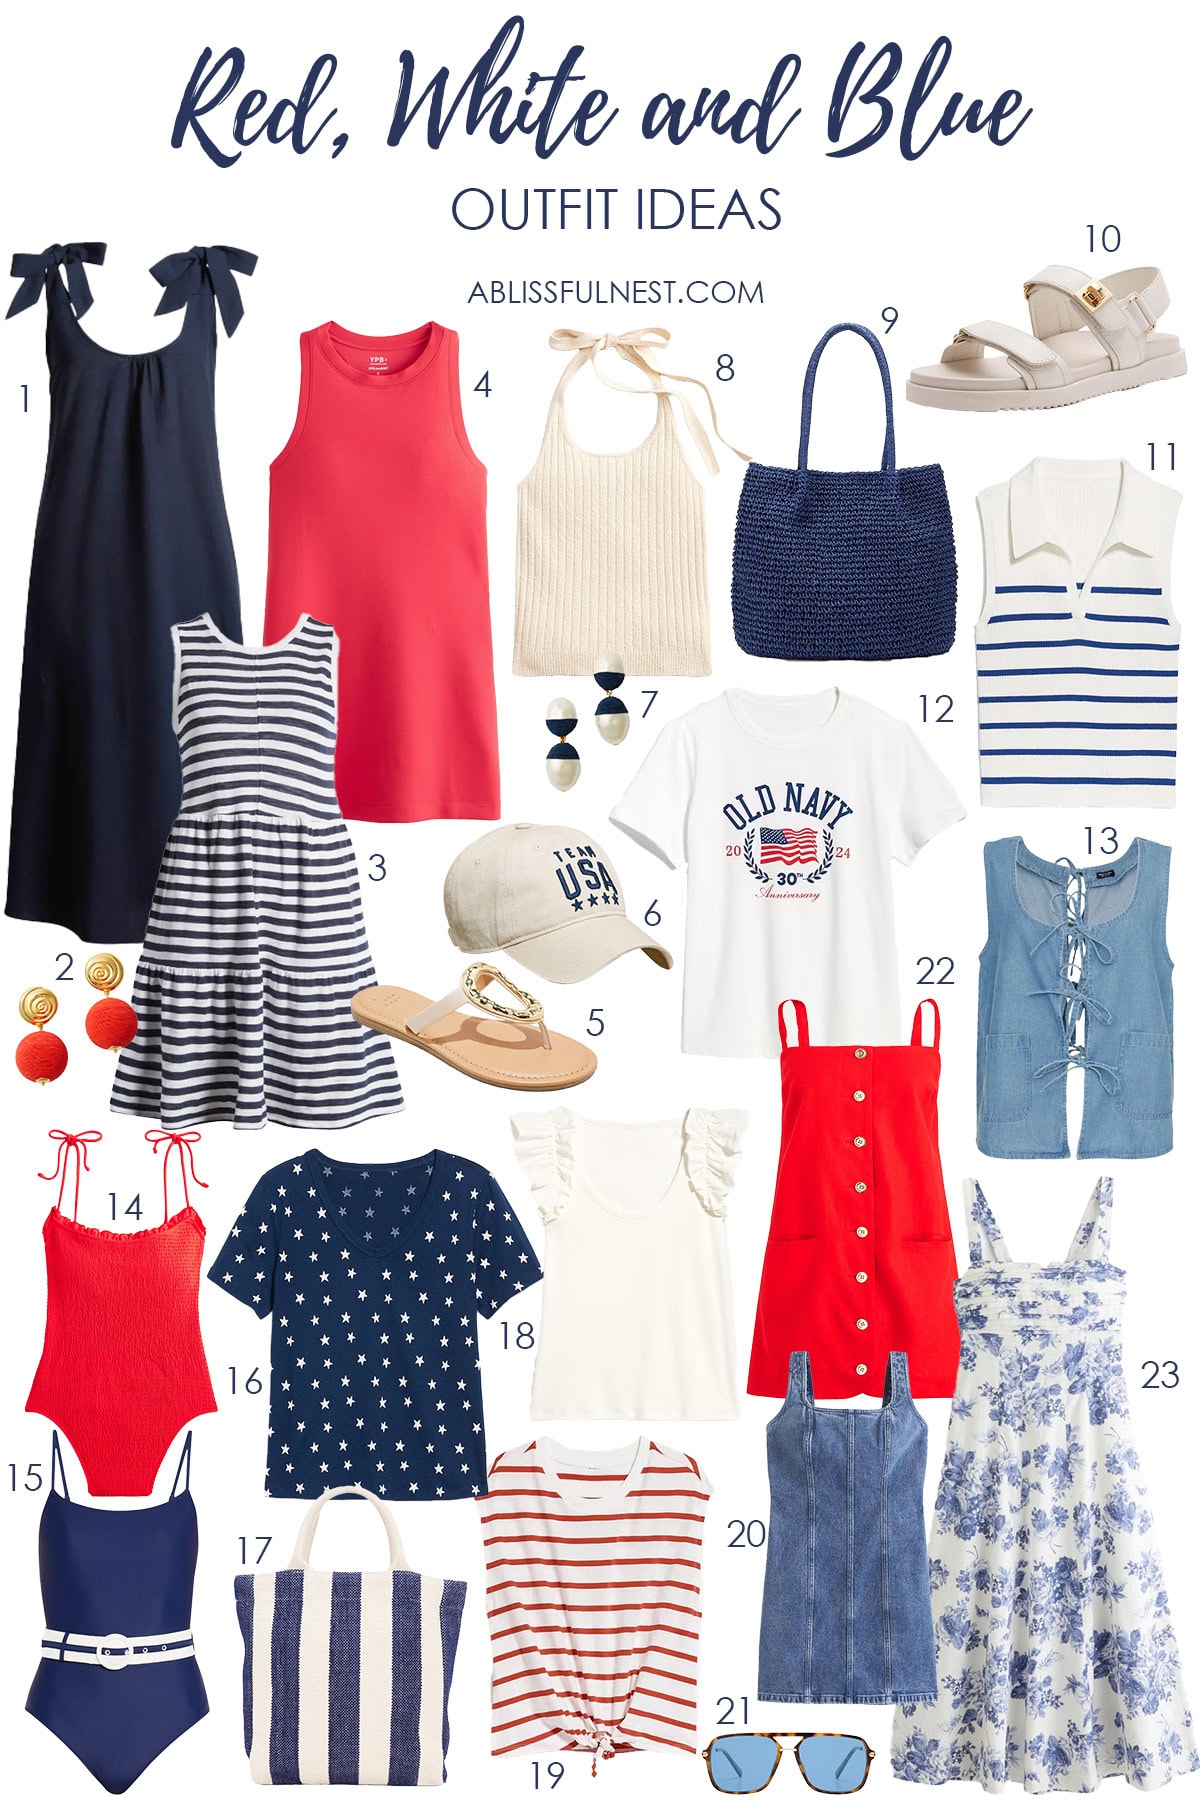 Red, White and Blue Summer Outfit Ideas